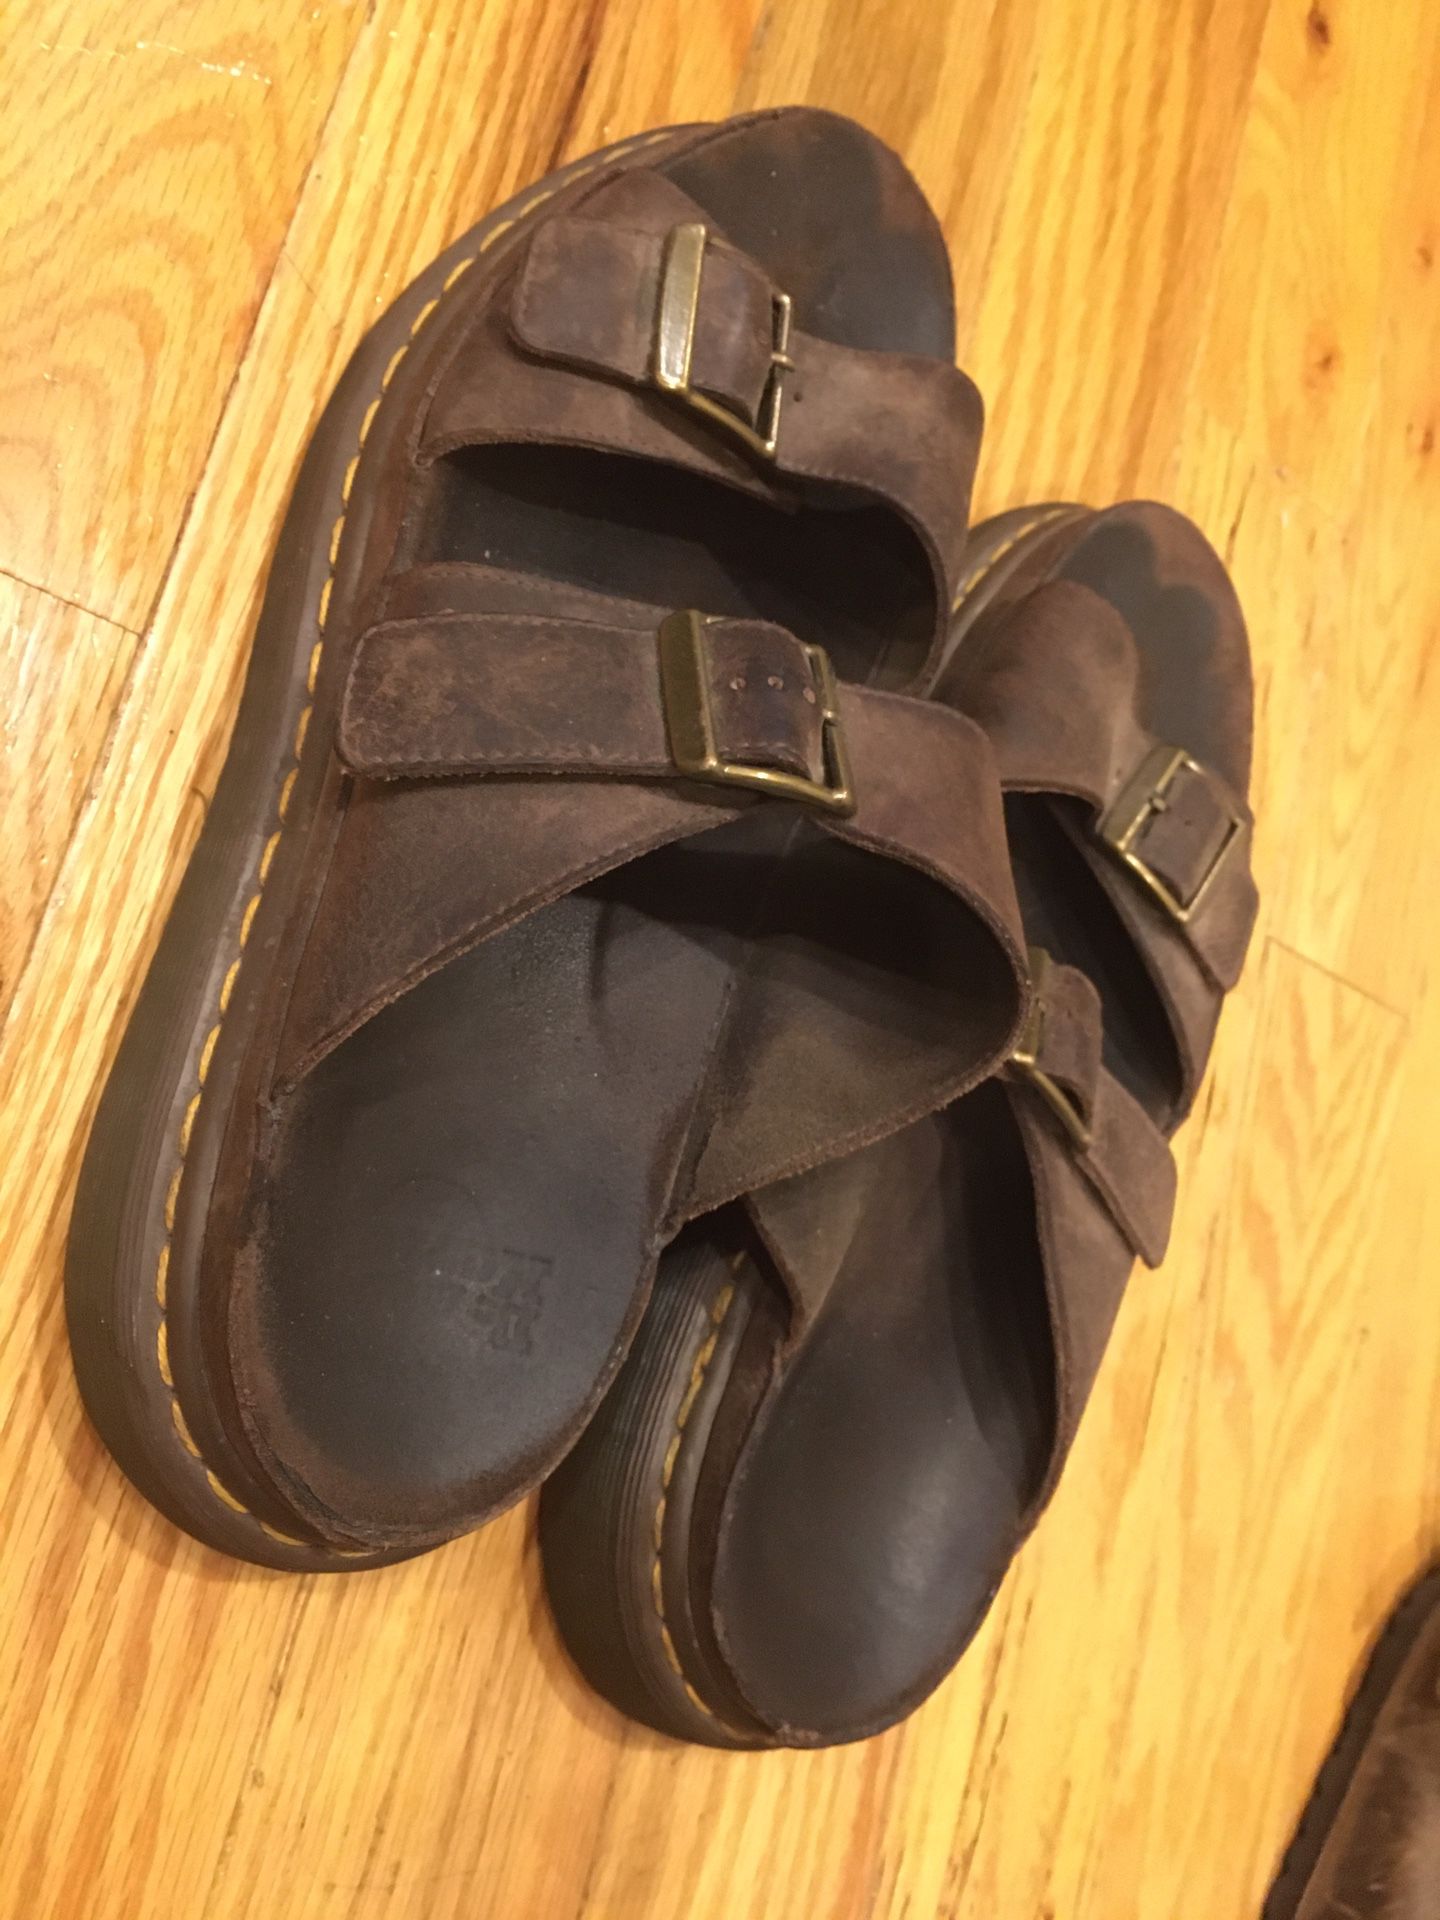 Doc Martens brown leather Birkenstock style sandals slippers shoes sz 11